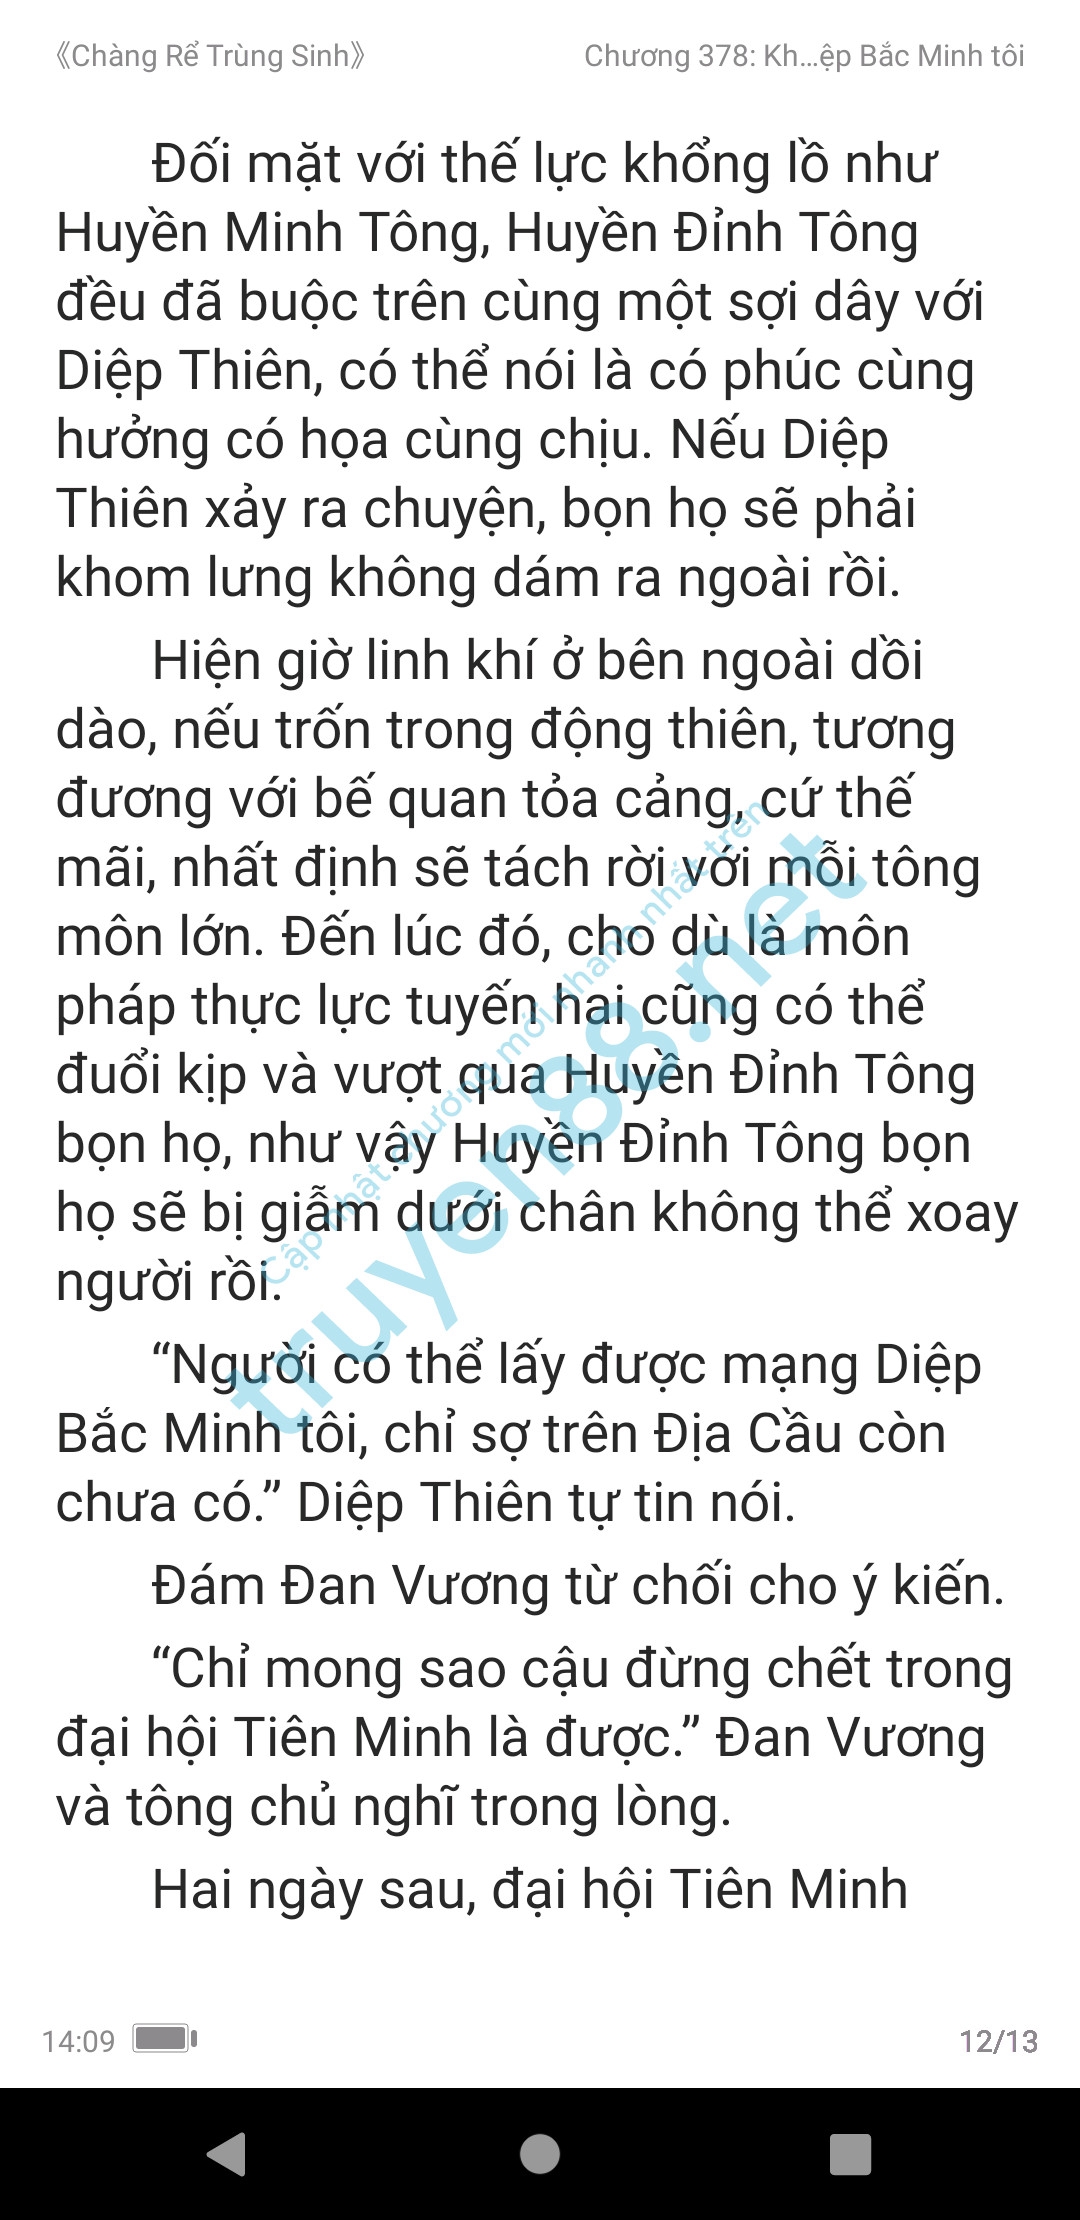 chang-re-trung-sinh-378-0